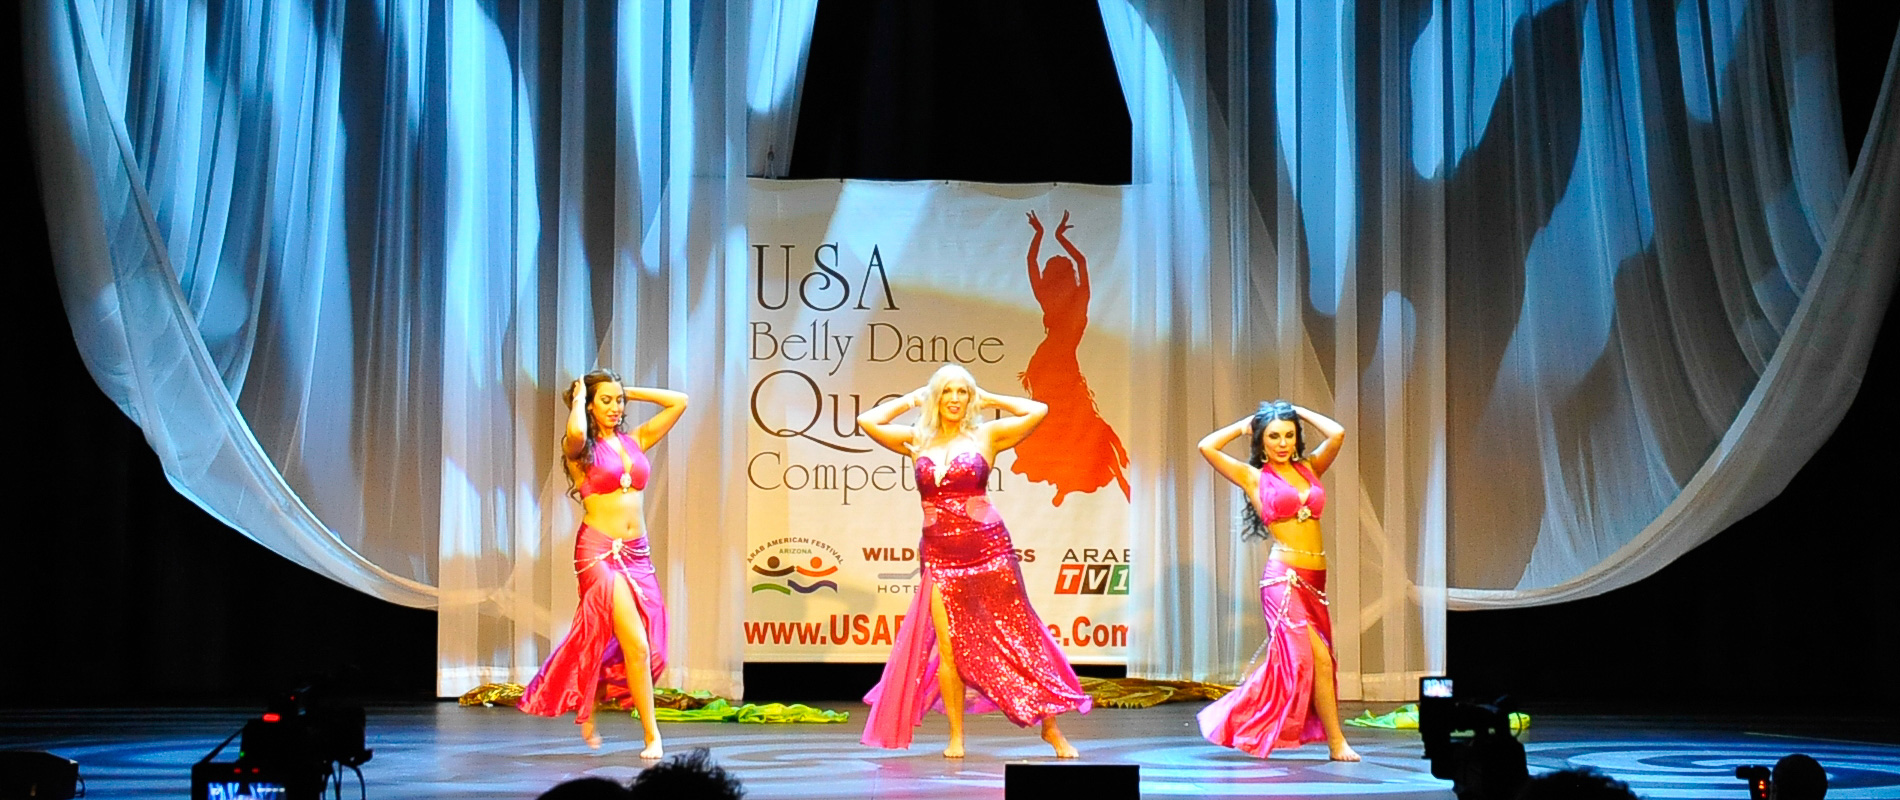 USA Belly Dance Queen Competition USA Belly Dance Competition